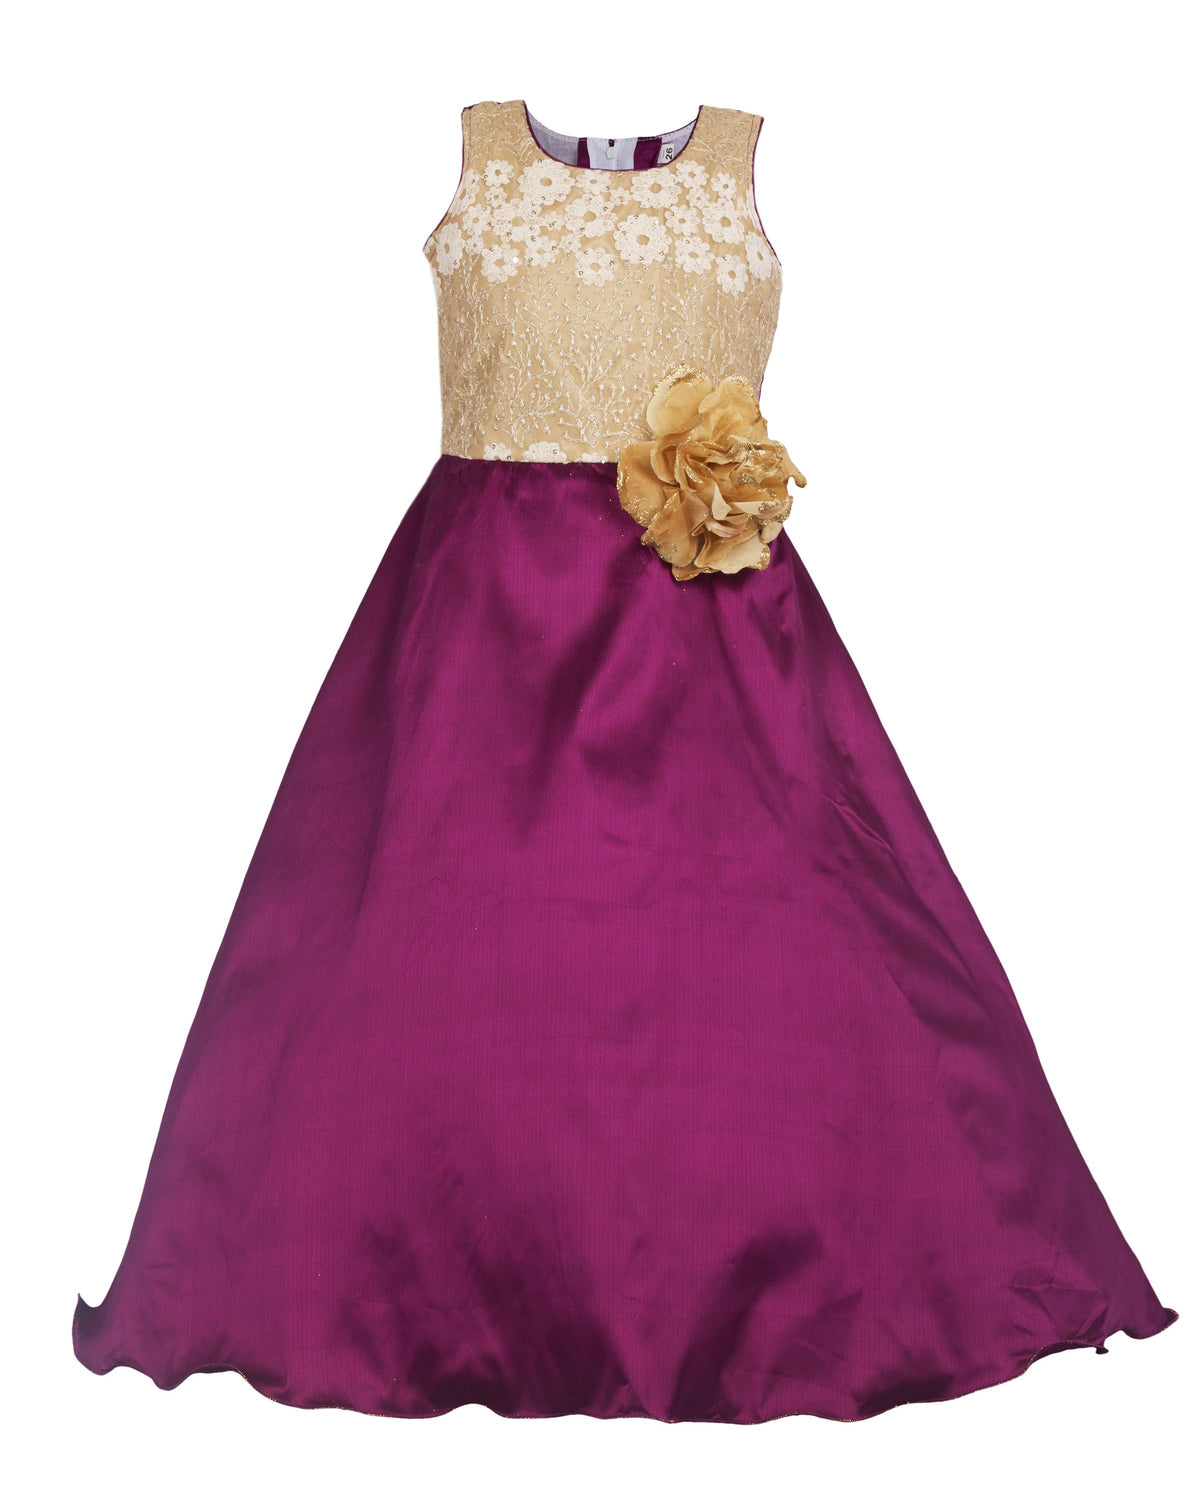 My Lil Princess Blossom Purple Gown Front View